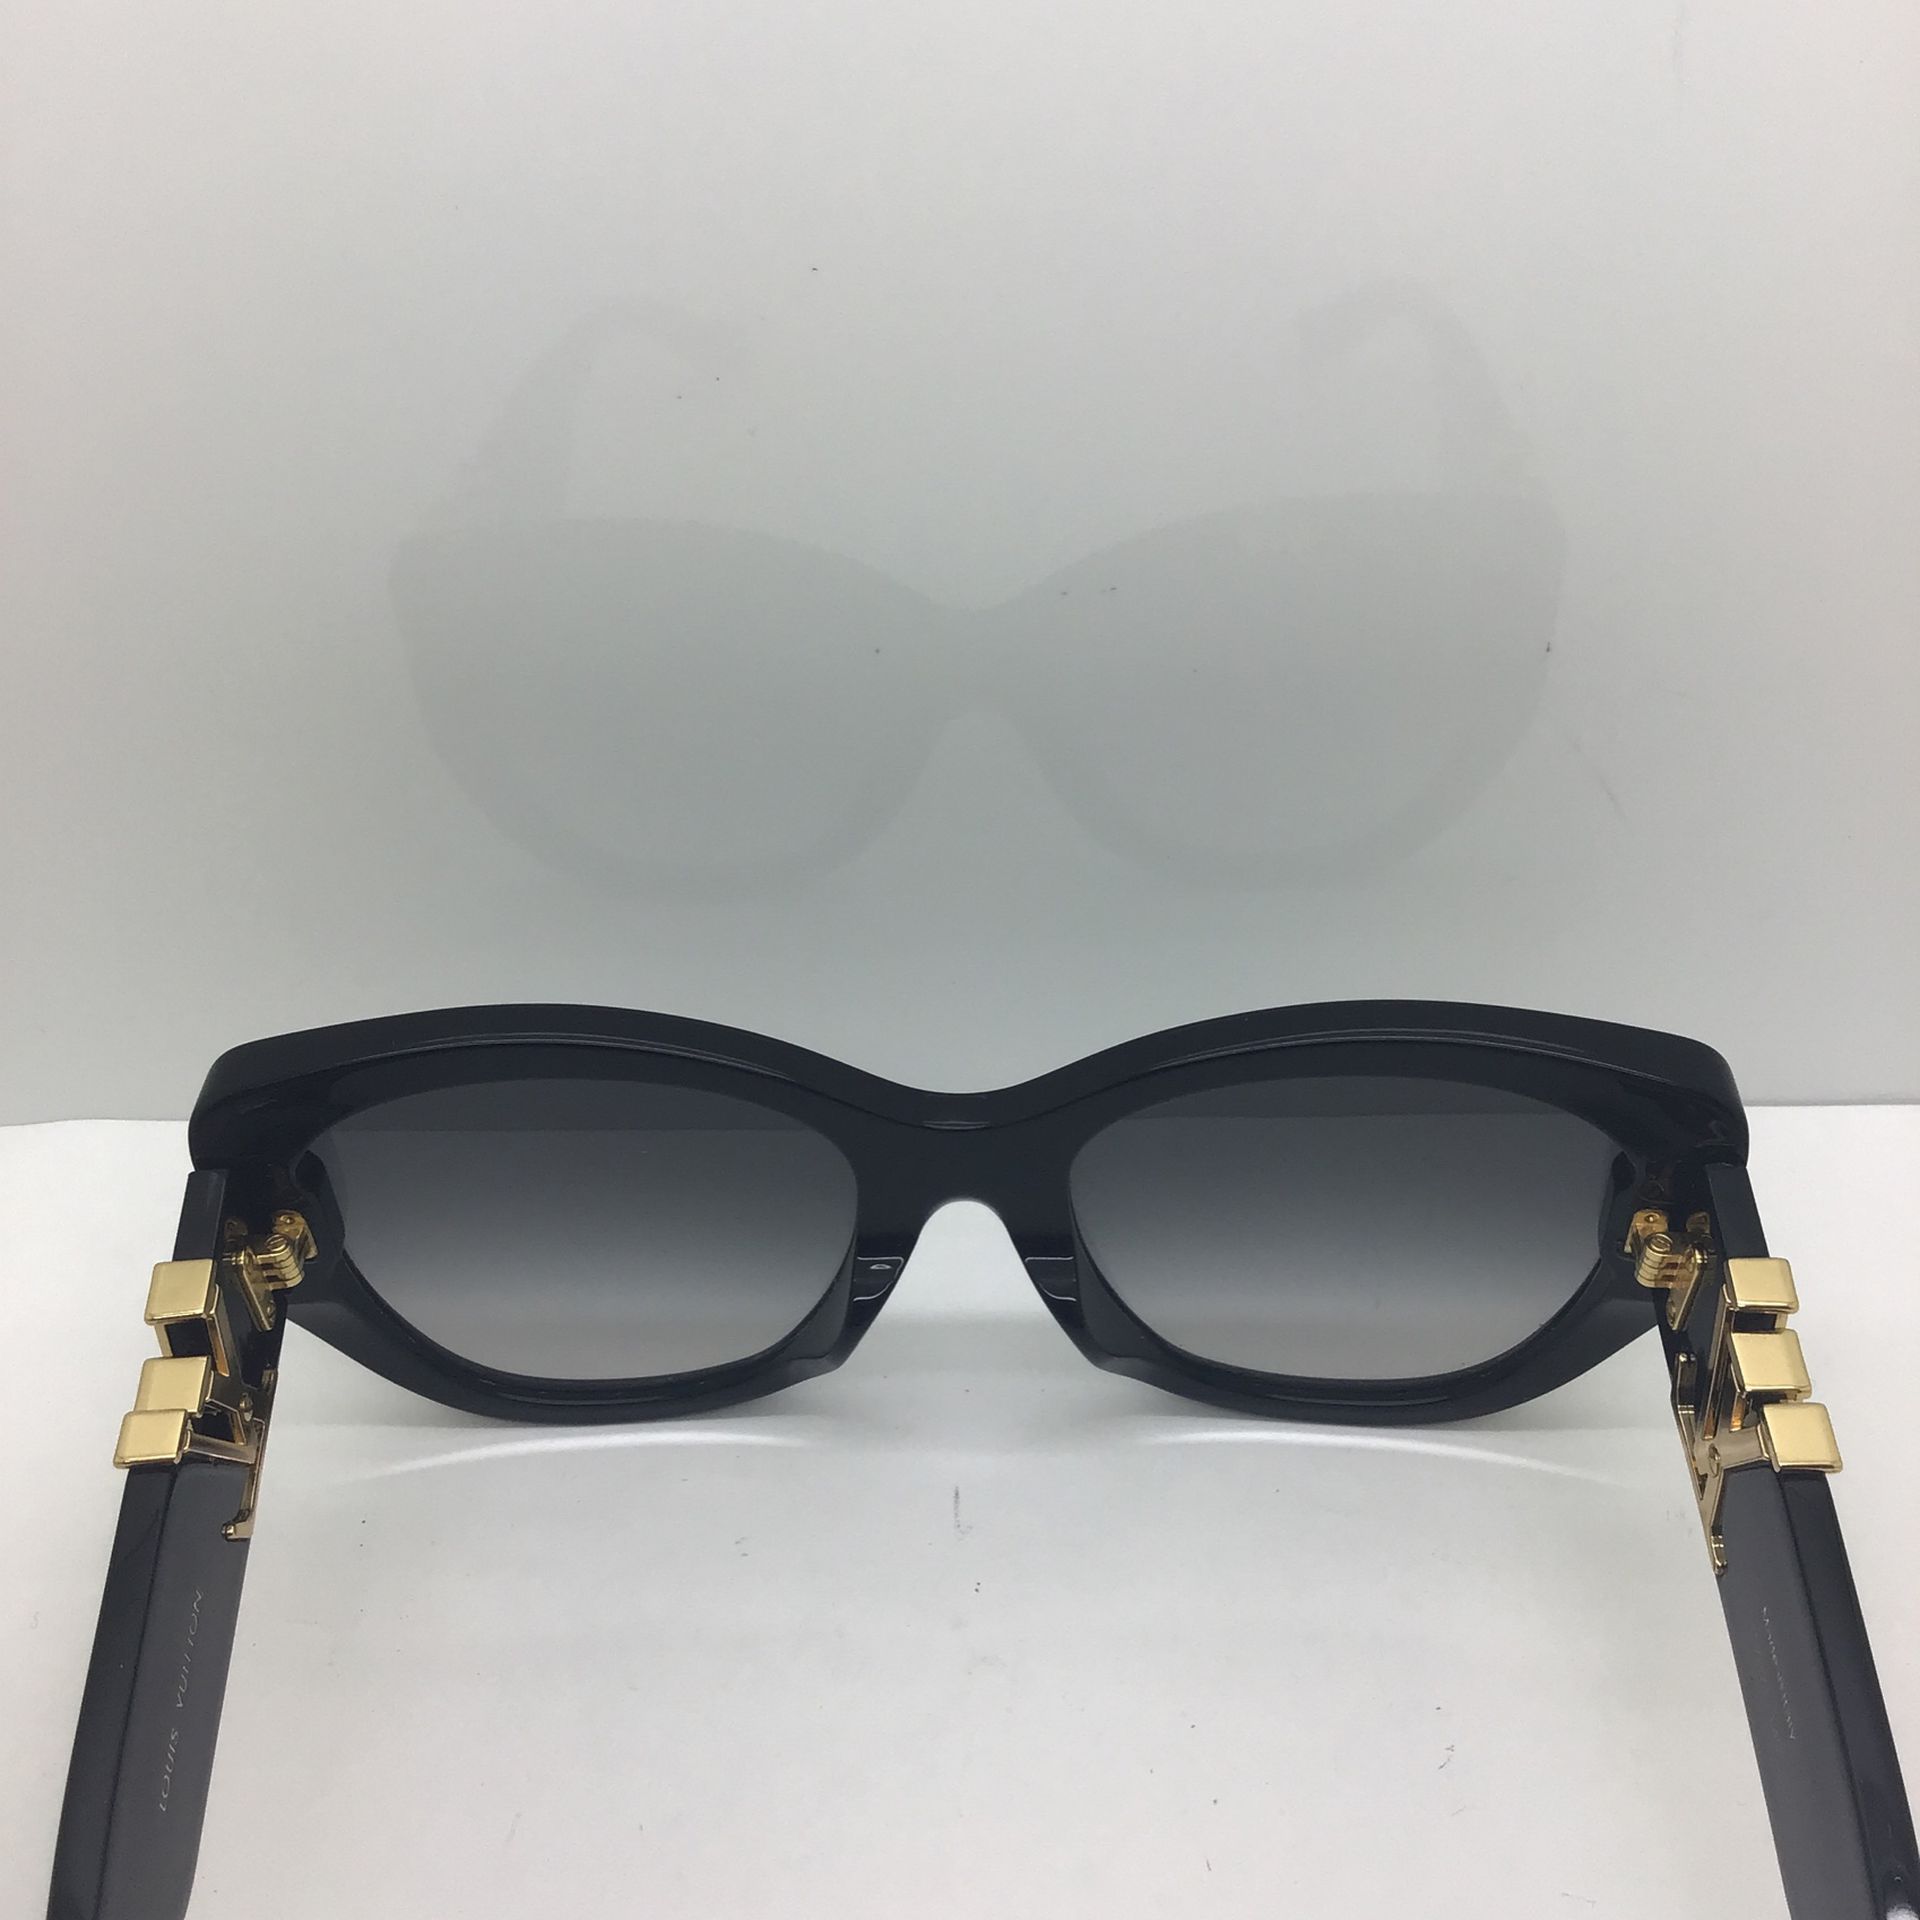 Louis Vuitton Sunglasses Sqaure Black Z1247E. Used. There are some